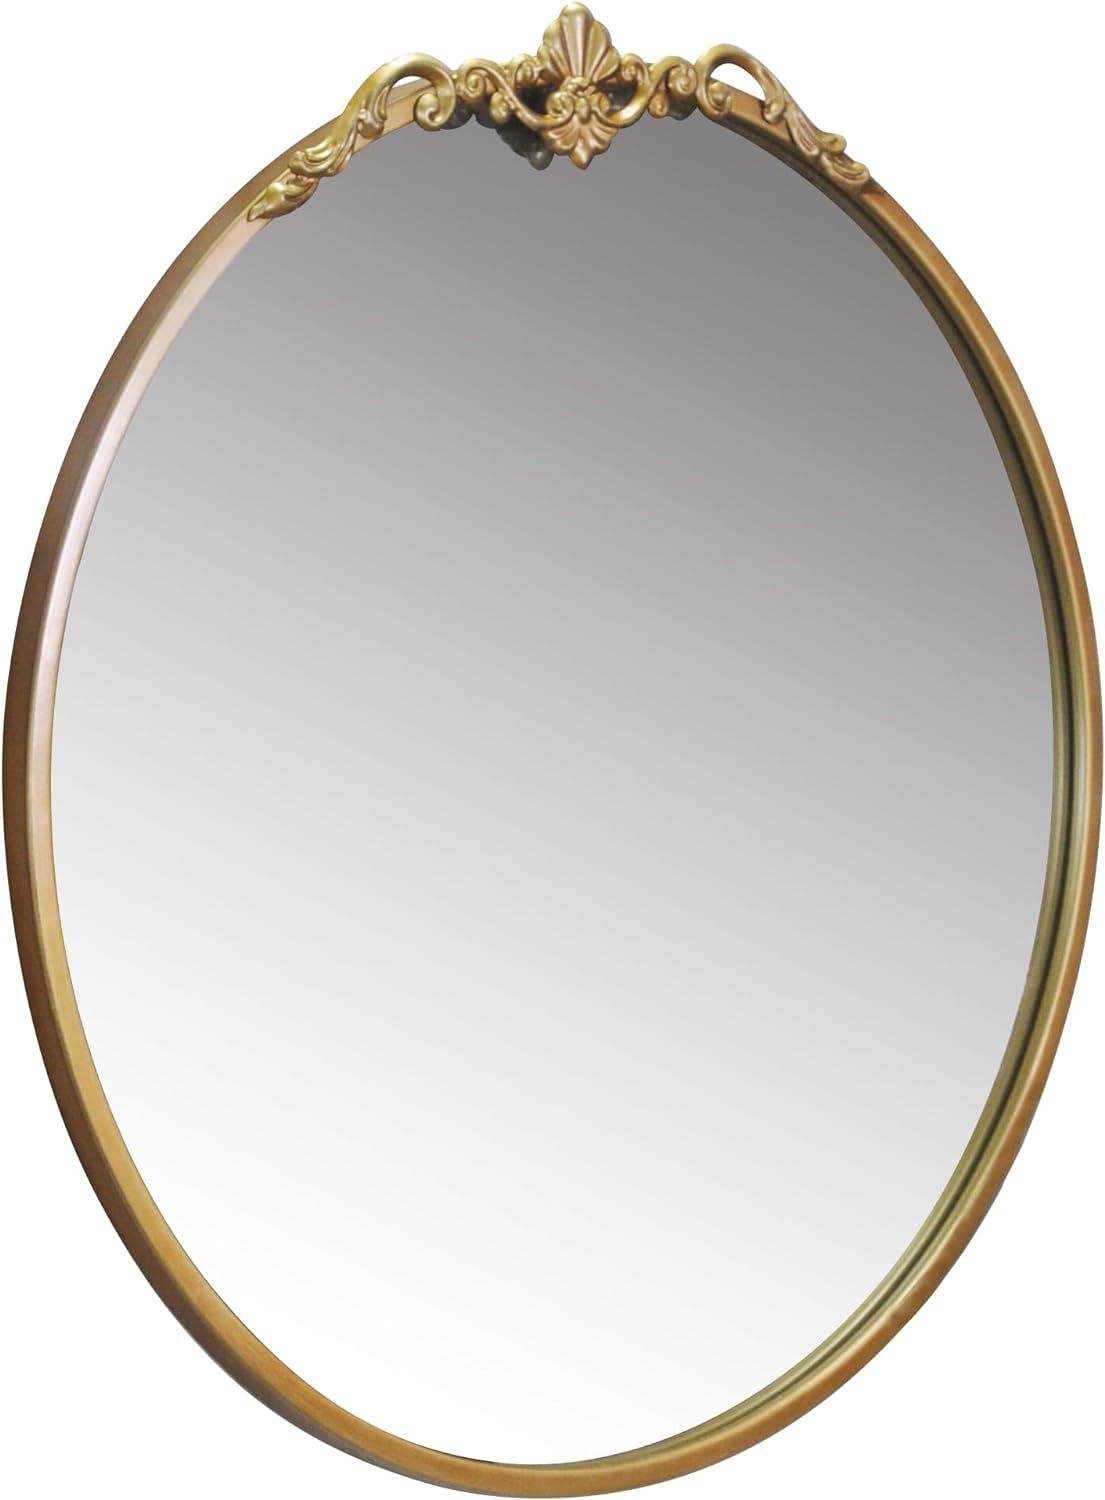 LOVNAHO Round Gold Mirror 24.5" Golden Antique Mirror Large Circle Vintage Mirrors for Wall Decor... | Amazon (US)